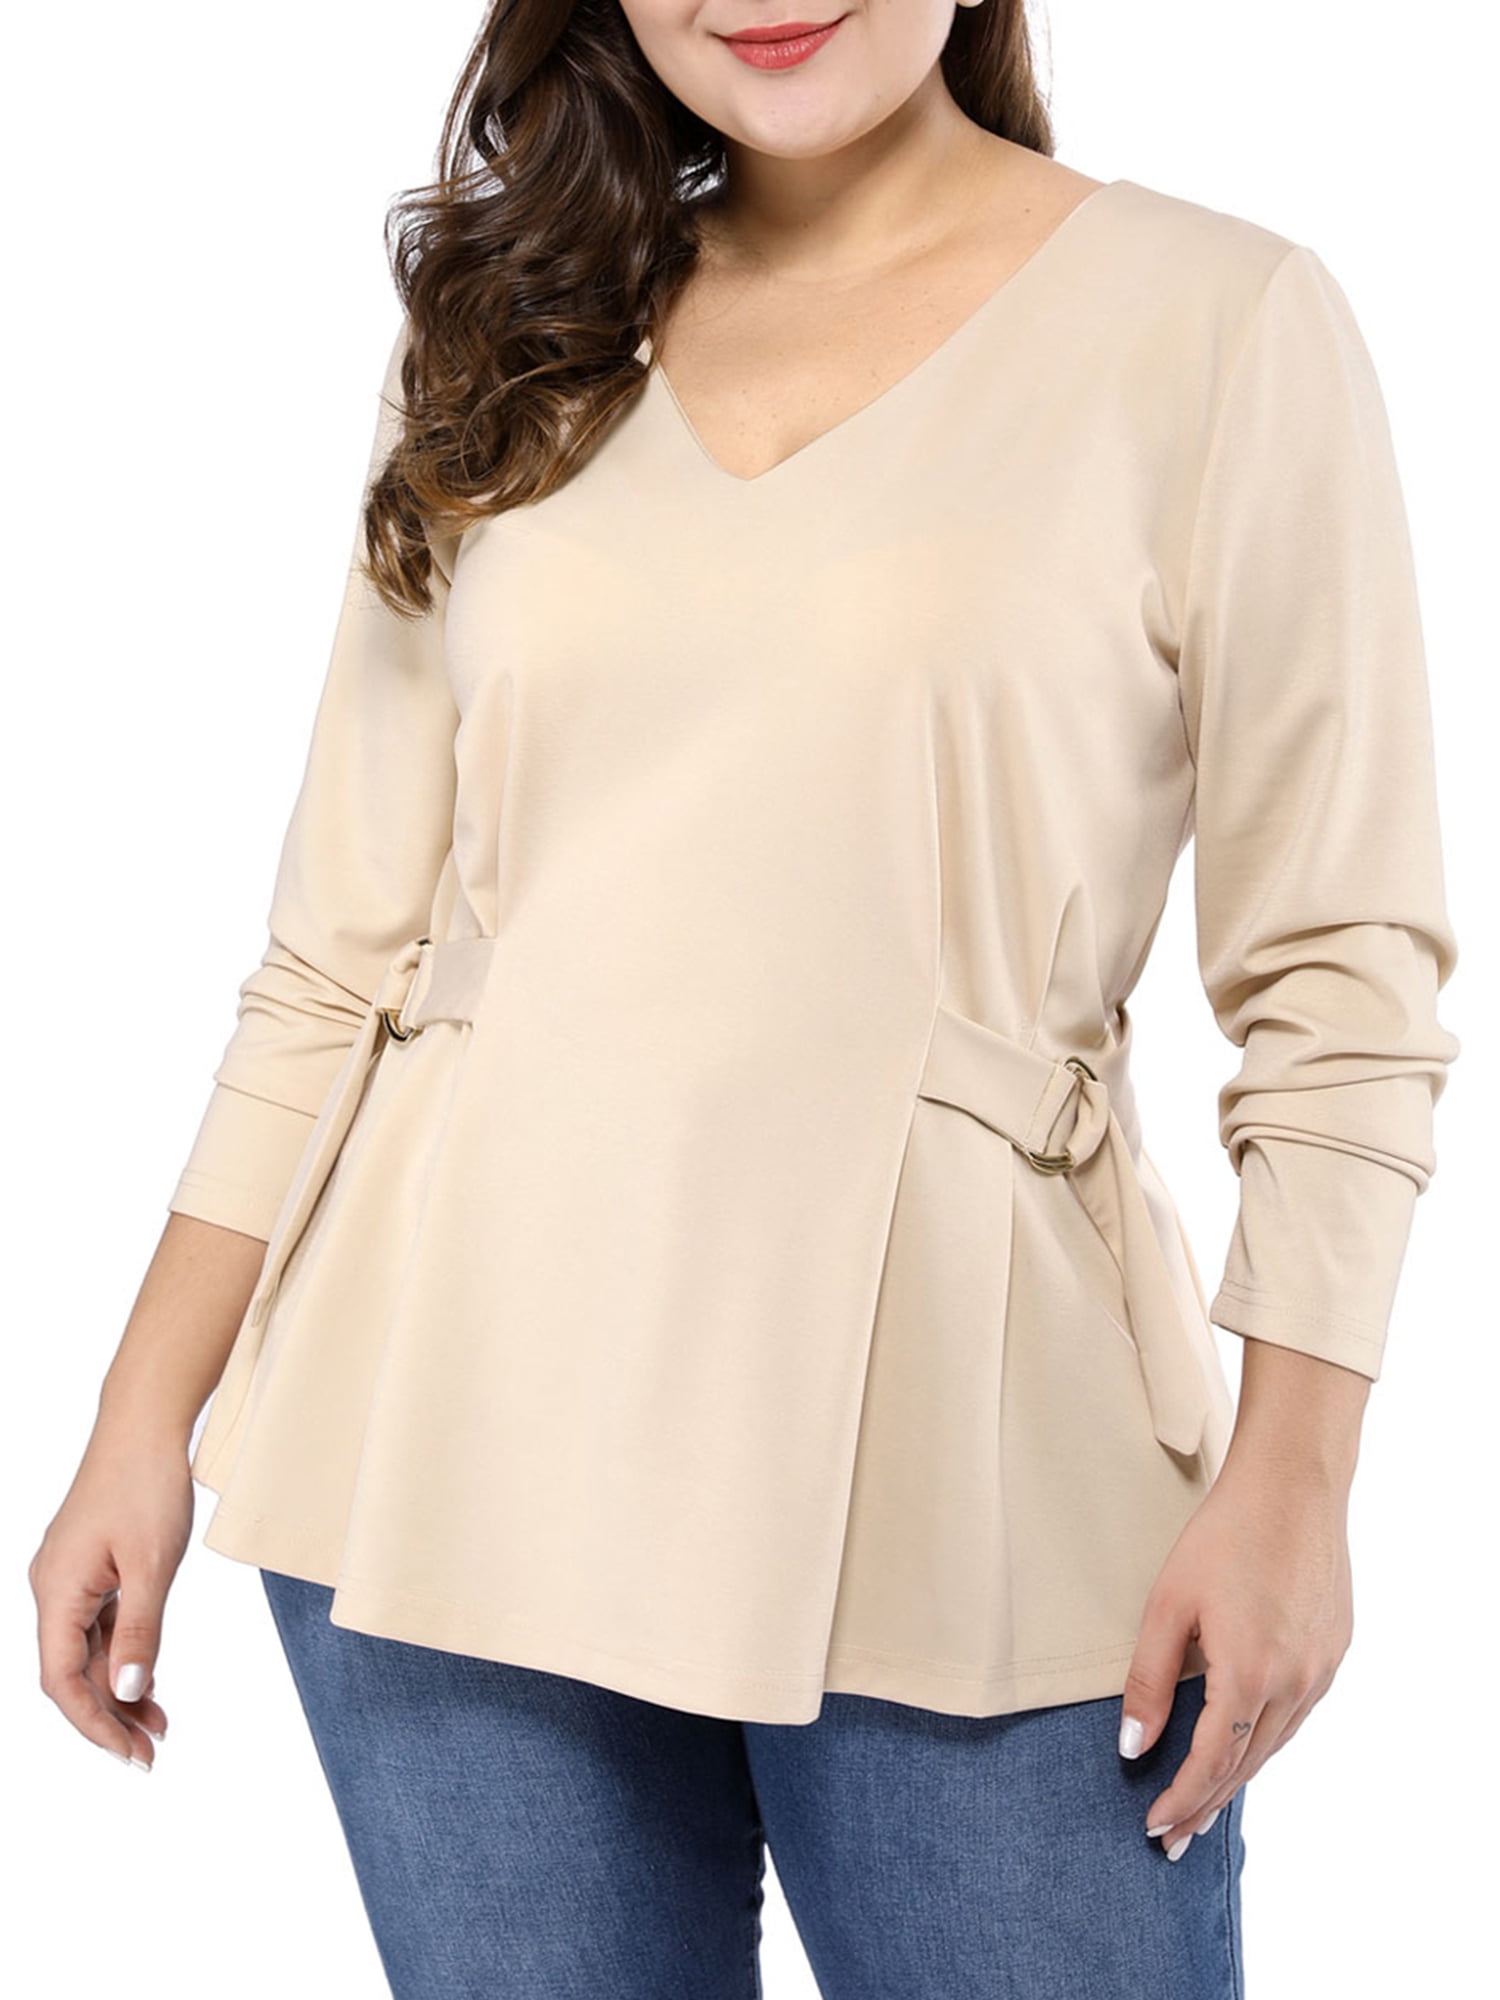 Unique Bargains Womens Plus Size V Neck Belted Pleated Peplum Top